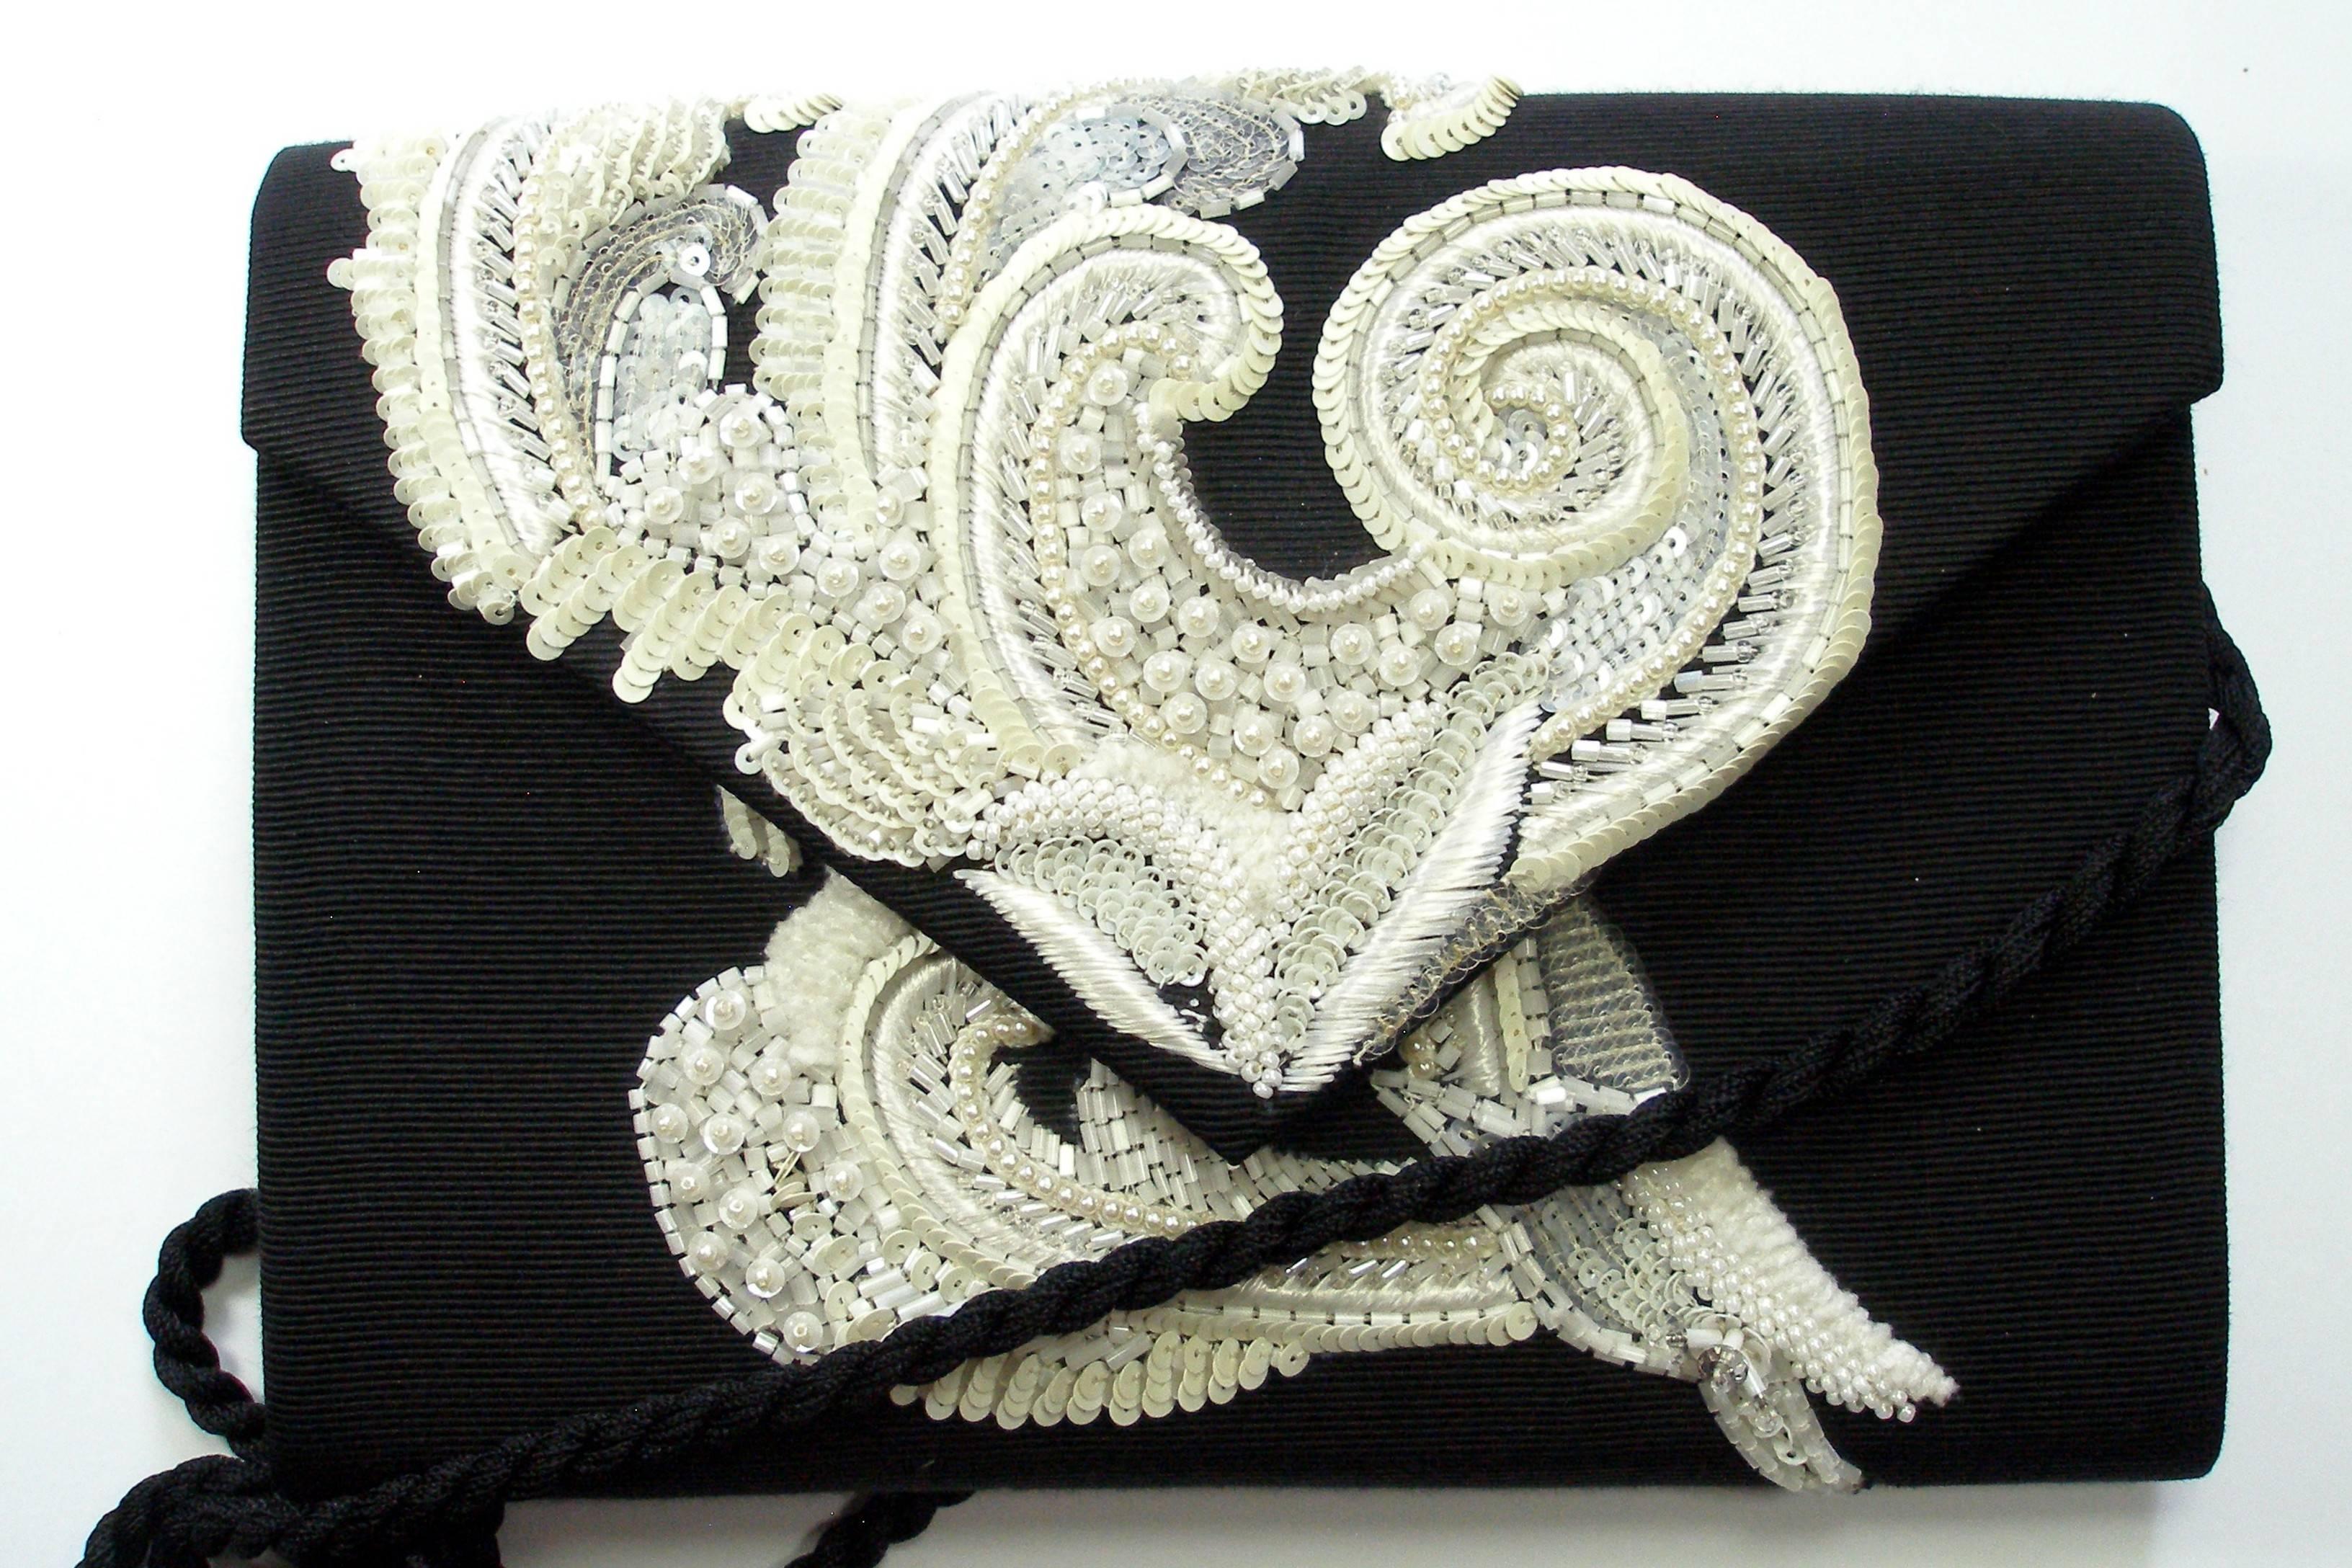 Women's WONDERFULL Vintage Dior Couture Pearls and Sequins Black and White Evening Bag 